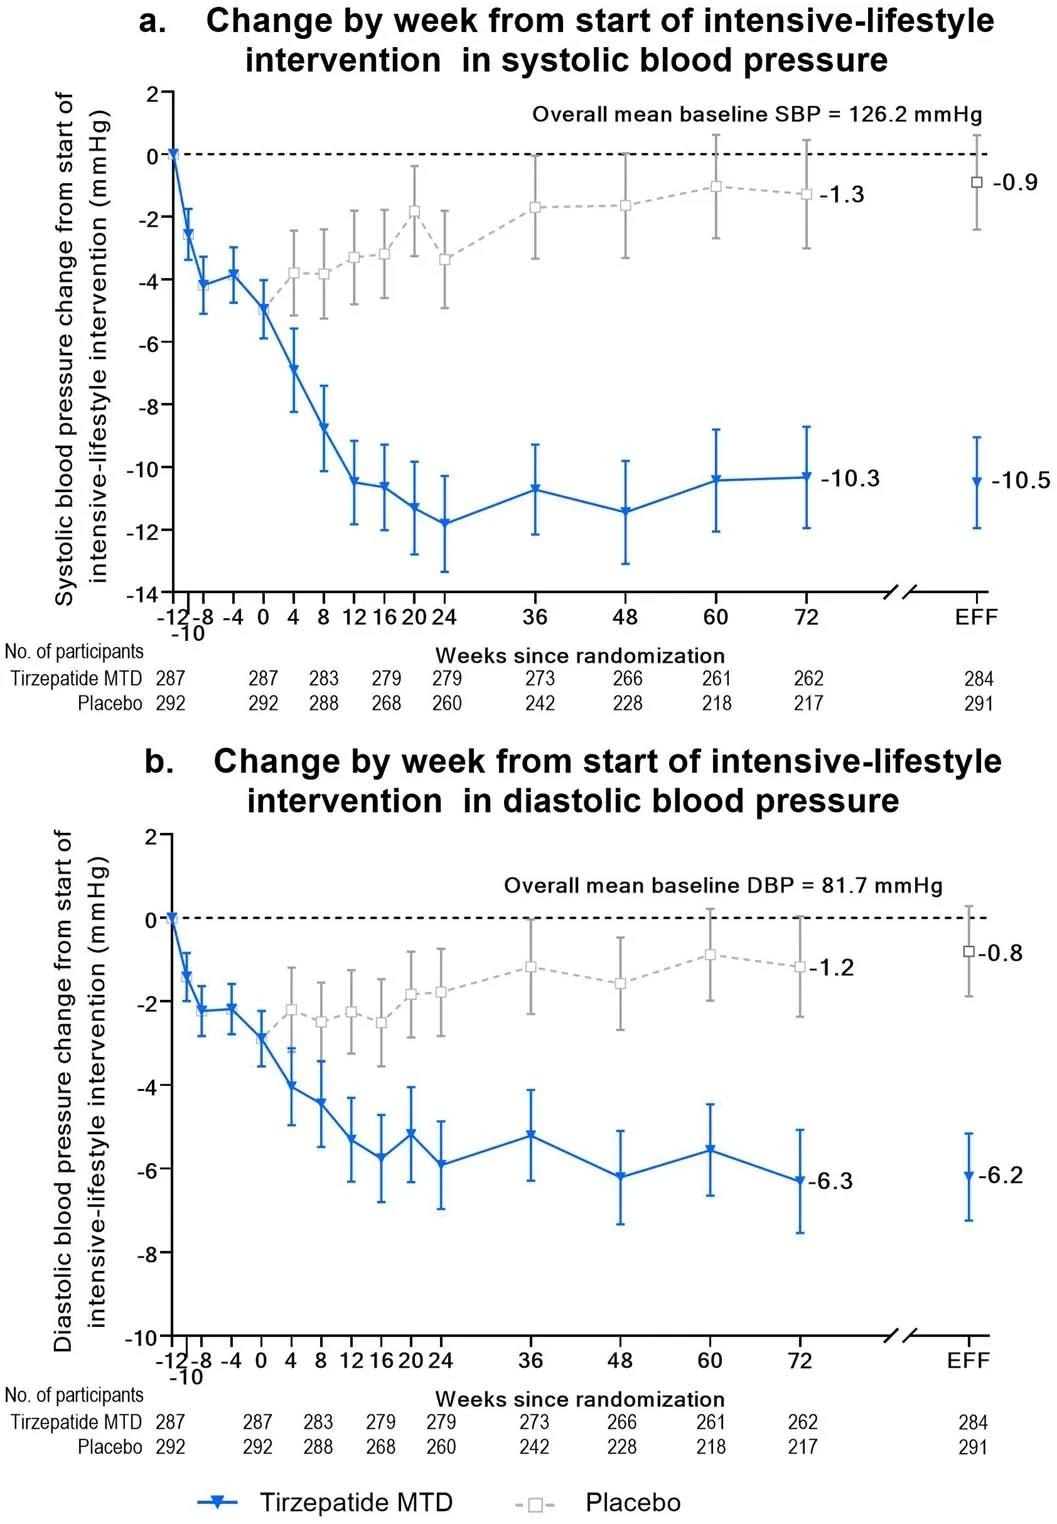 Blood pressure change from start of lead-in period over time. Panel A, mean (95% confidence interval) change from baseline over time in systolic blood pressure from start of intensive-lifestyle intervention lead-in period (week -12) to 72 weeks using observed means. Week 72 estimates for the efficacy estimand (EFF) are also shown. Panel B, mean (95% confidence interval) change from baseline over time in diastolic blood pressure from start of intensive-lifestyle intervention lead-in period (week -12) to 72 weeks using observed means. Week 72 estimates for the efficacy estimand (EFF) are also shown.